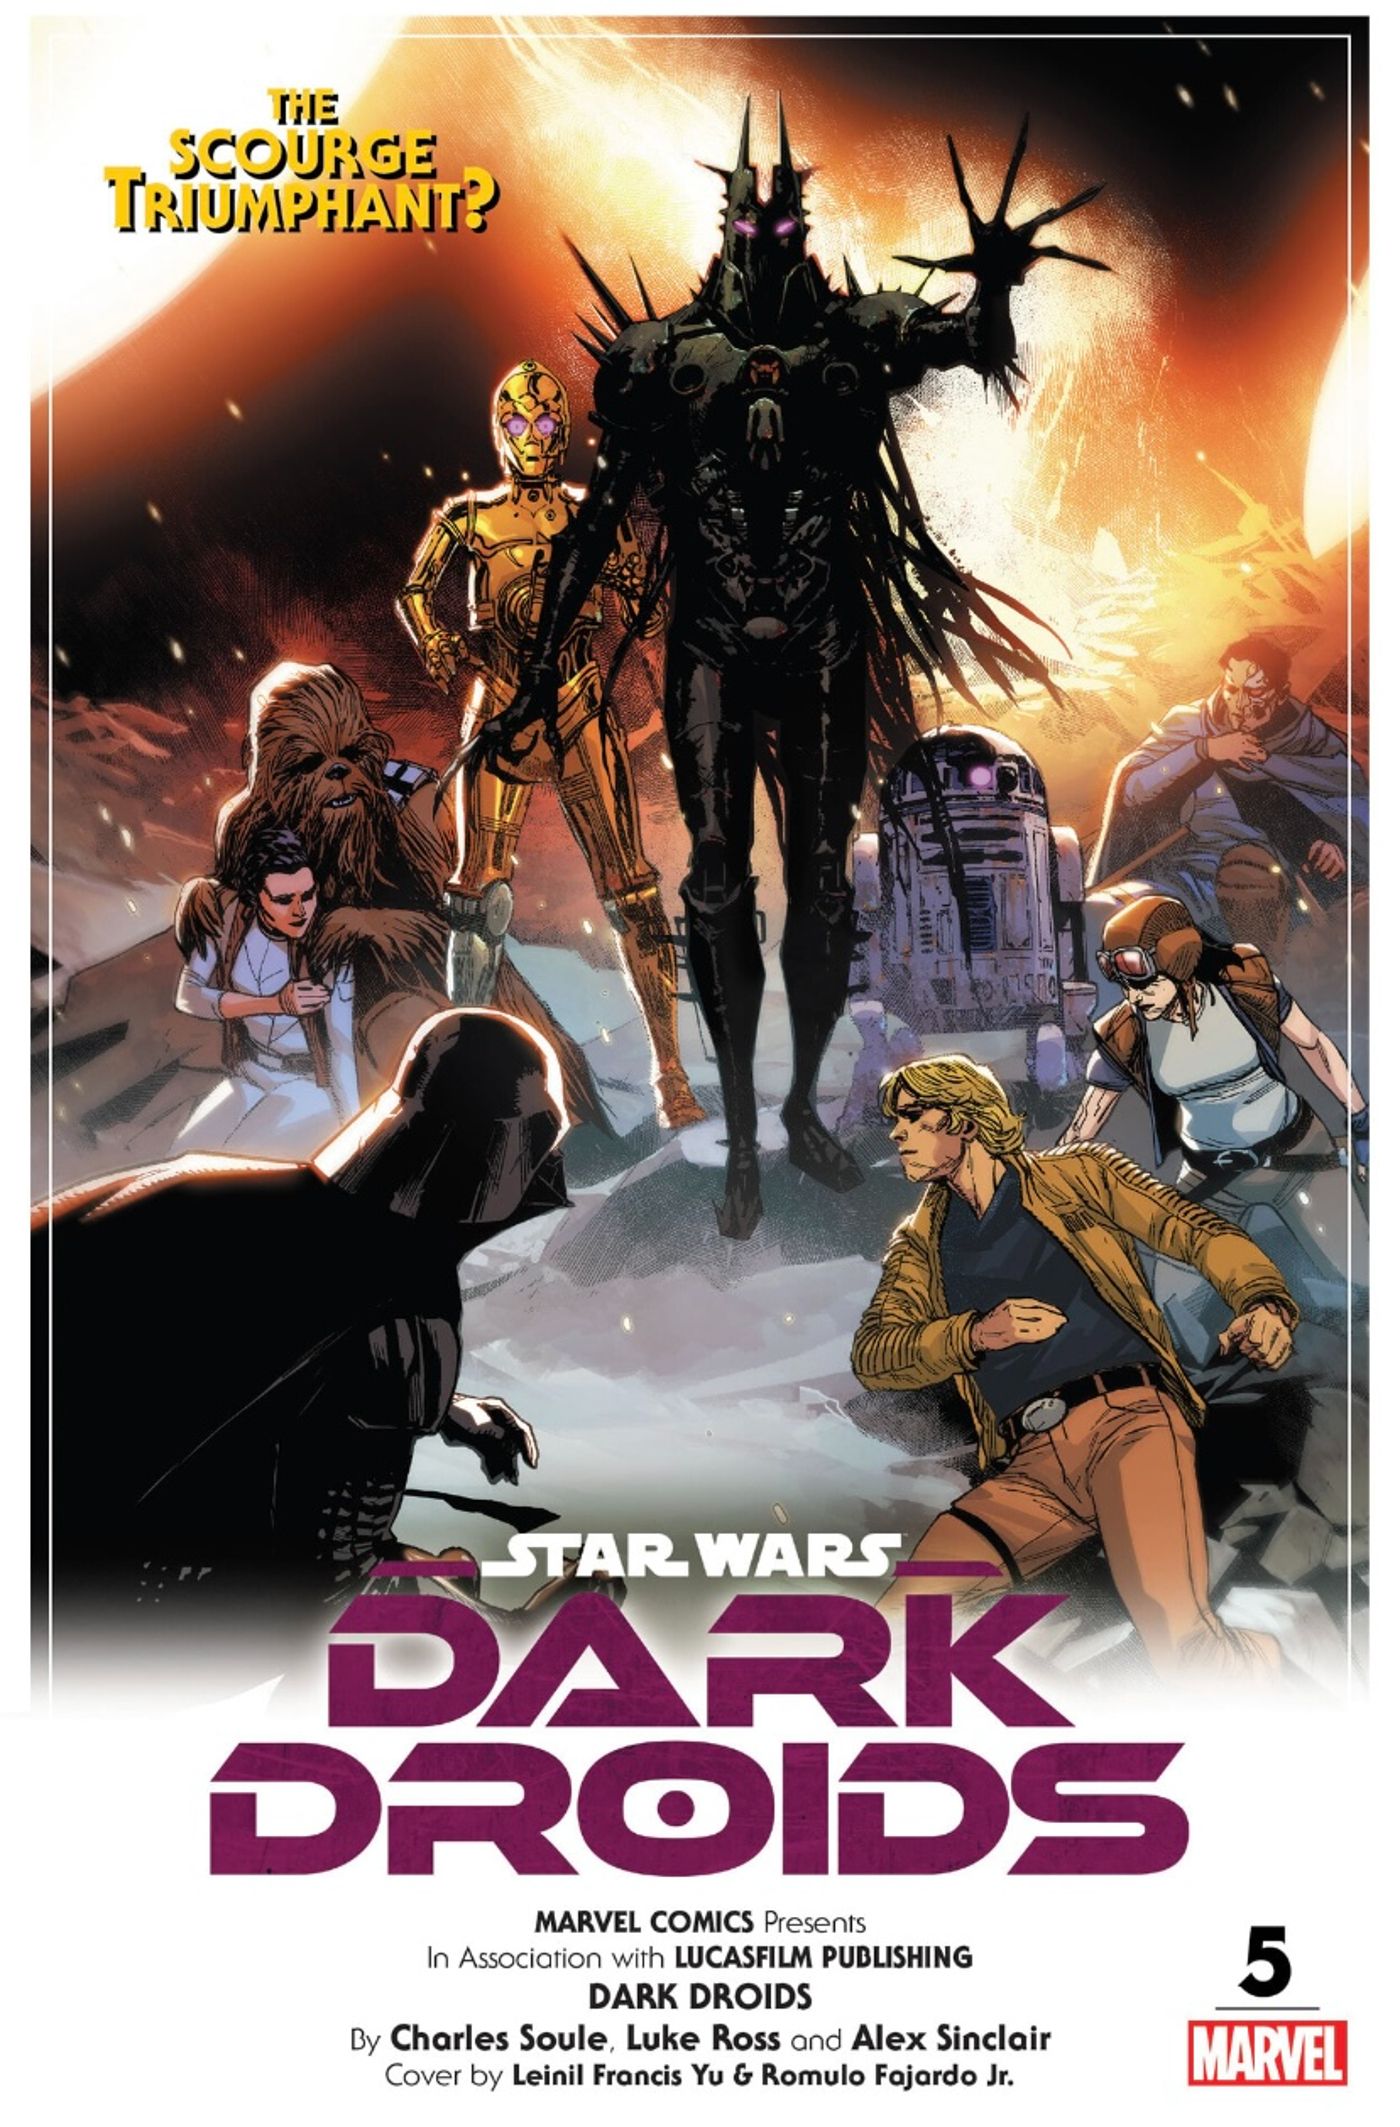 Dark Droids #5 main cover by Leinil Francis Yu, homage to original Star Wars film poster